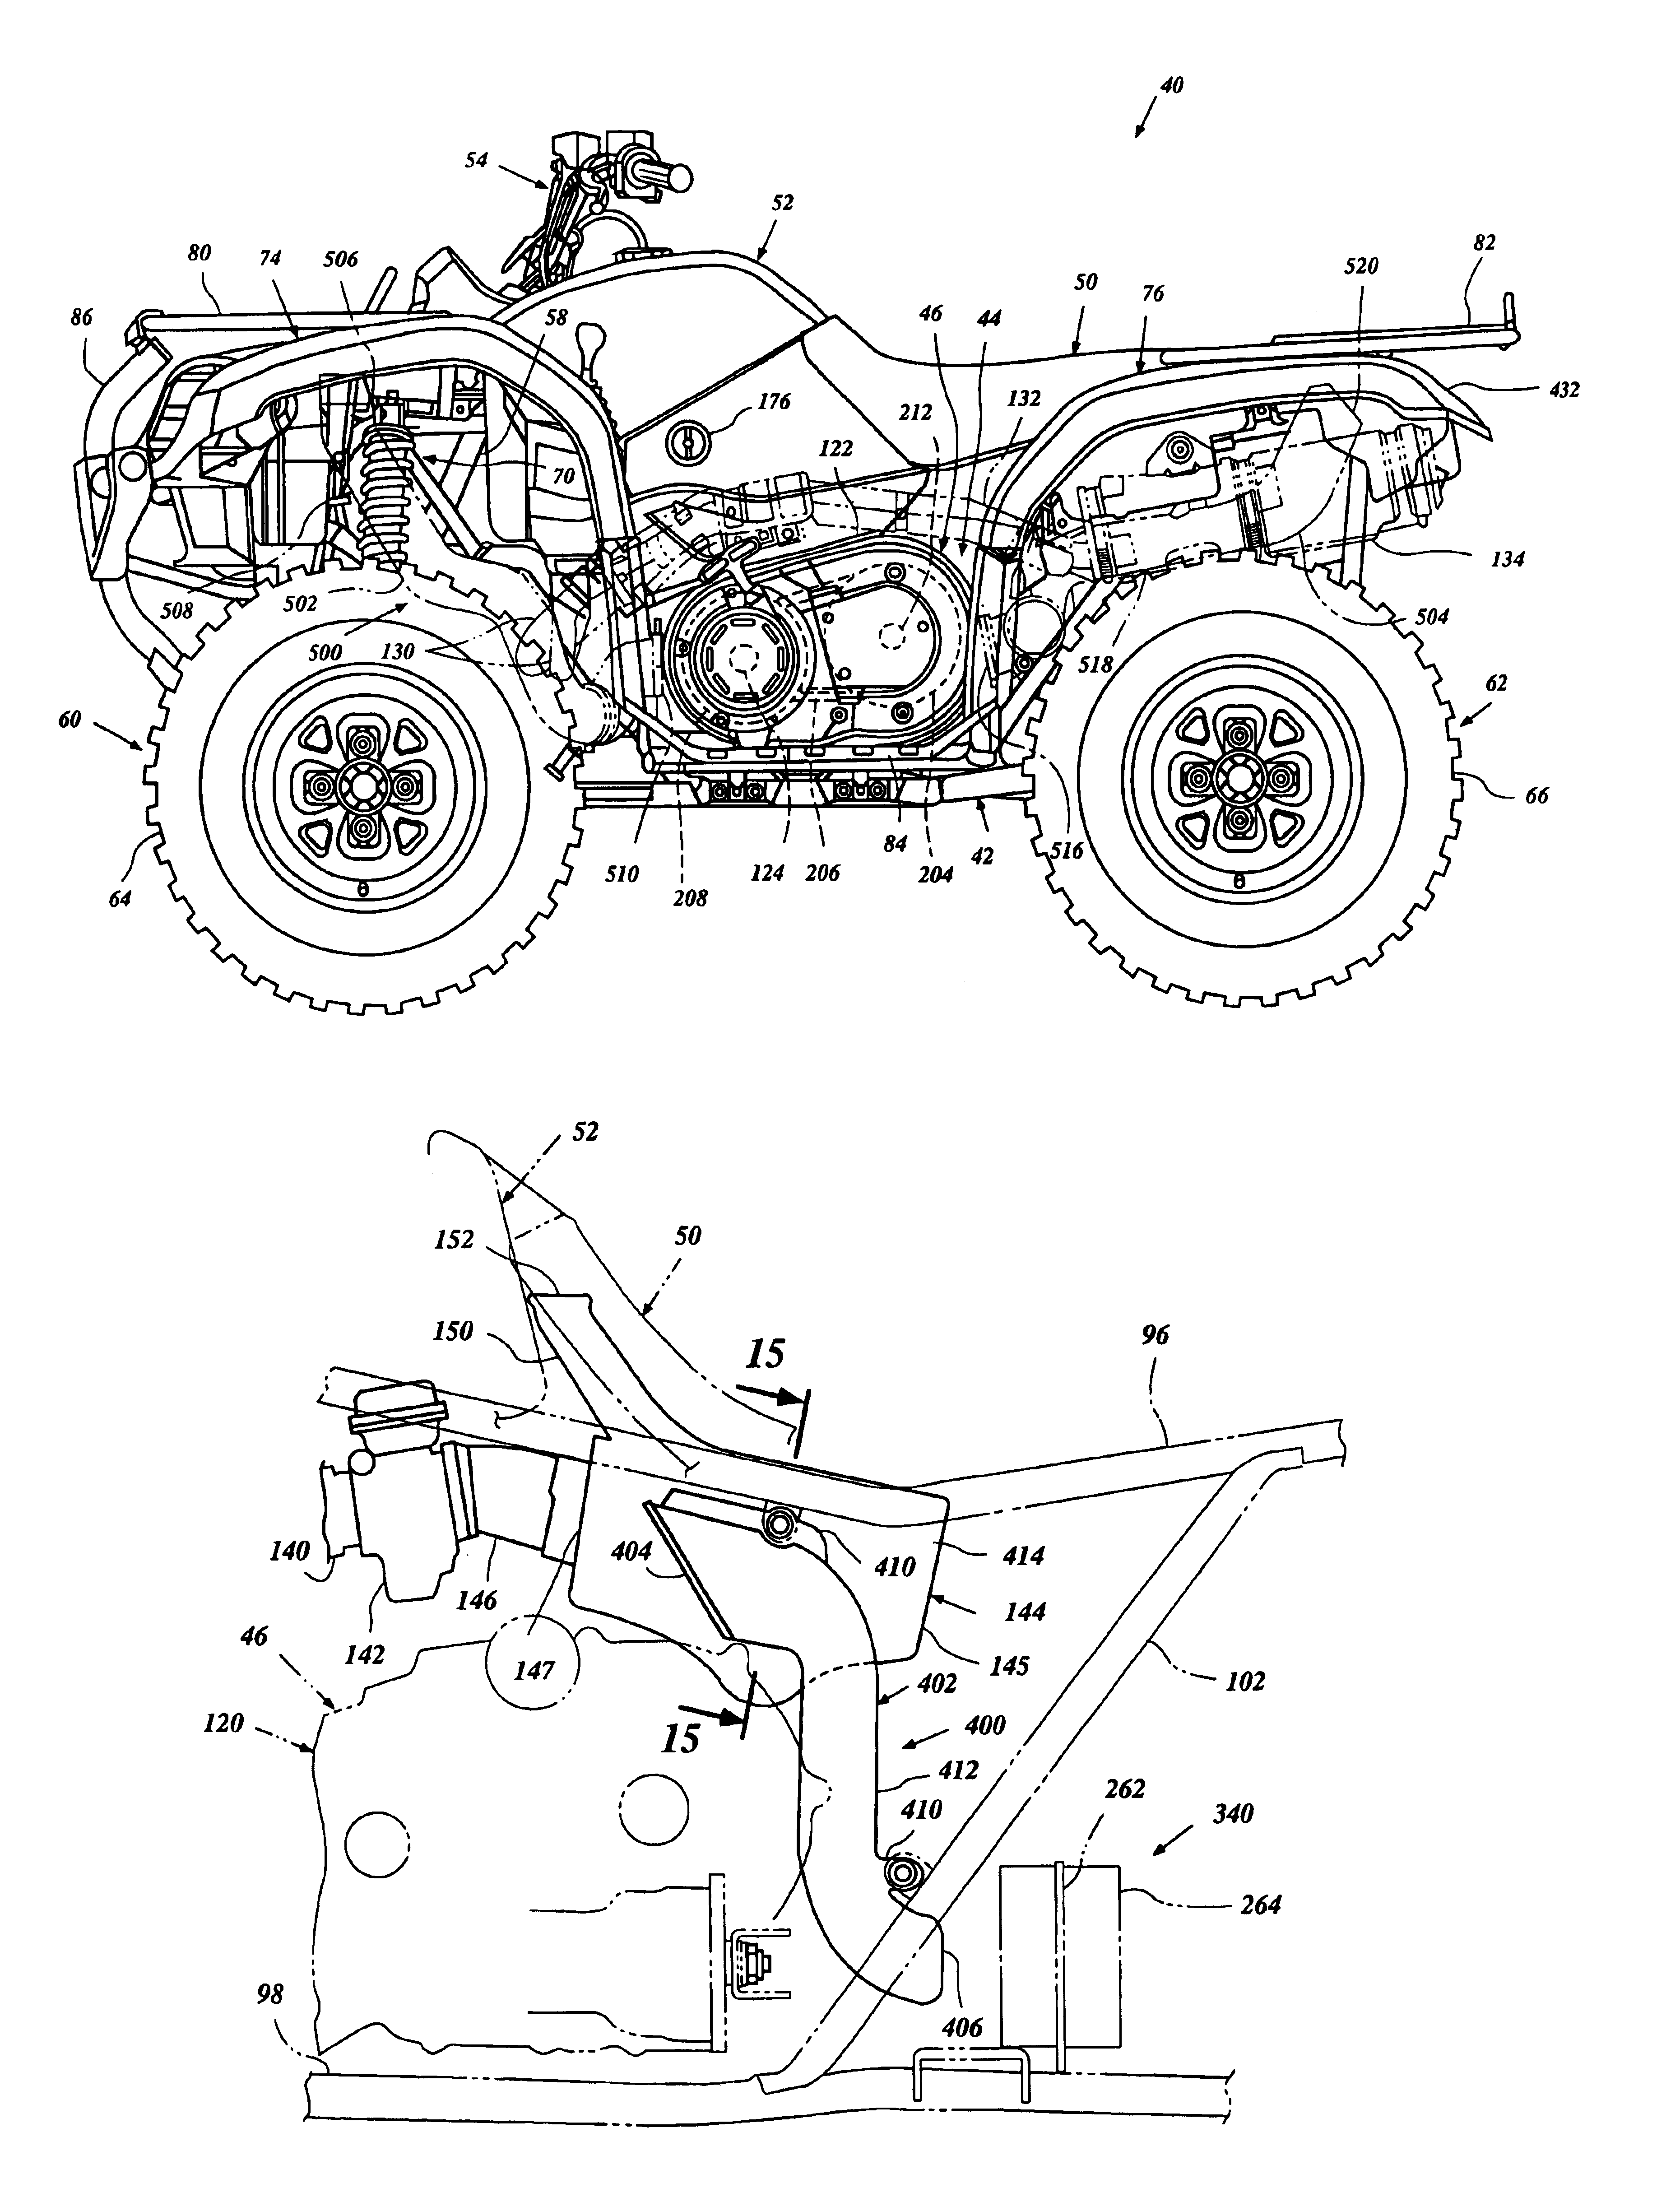 Cooling air system for small vehicle